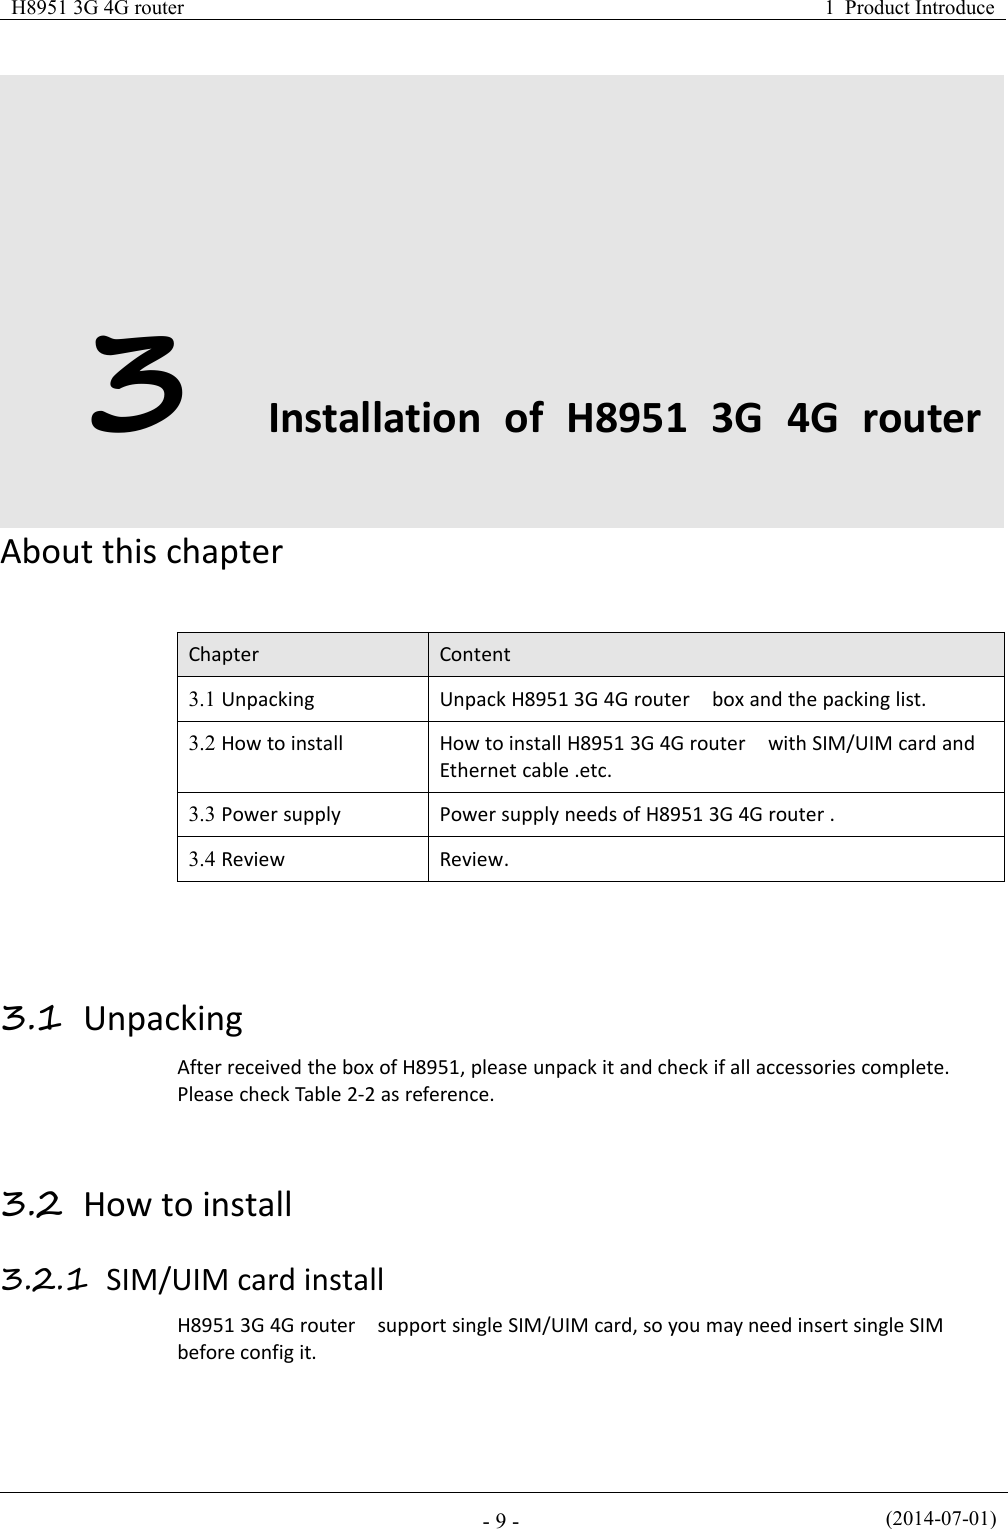 H8951 3G 4G router1 Product Introduce(2014-07-01)- 9 -3Installation of H8951 3G 4G routerAbout this chapterChapterContent3.1 UnpackingUnpack H8951 3G 4G router box and the packing list.3.2 How to installHow to install H8951 3G 4G router with SIM/UIM card andEthernet cable .etc.3.3 Power supplyPower supply needs of H8951 3G 4G router .3.4 ReviewReview.3.1 UnpackingAfter received the box of H8951, please unpack it and check if all accessories complete.Please check Table 2-2 as reference.3.2 How to install3.2.1 SIM/UIM card installH8951 3G 4G router support single SIM/UIM card, so you may need insert single SIMbefore config it.